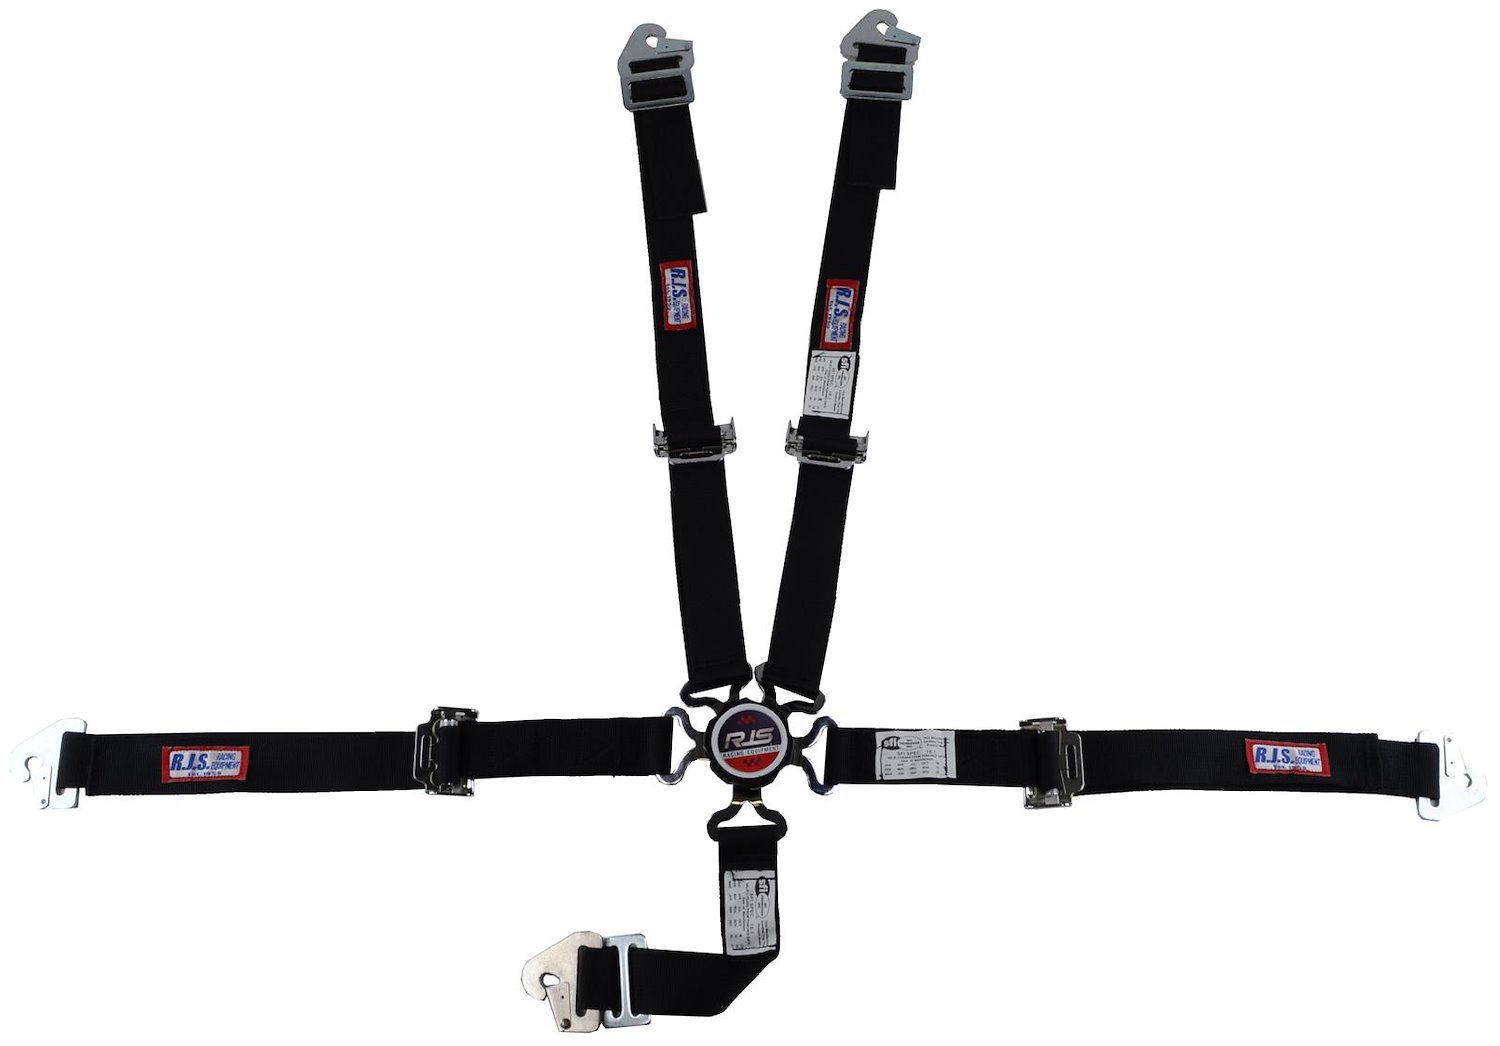 SFI 16.1 CAM-LOCK HARNESS 2 PULL UP Lap Belt 2 Shoulder Harness Individual ROLL BAR Mount 2 DOUBLE Sub ALL WRAP ENDS BLACK